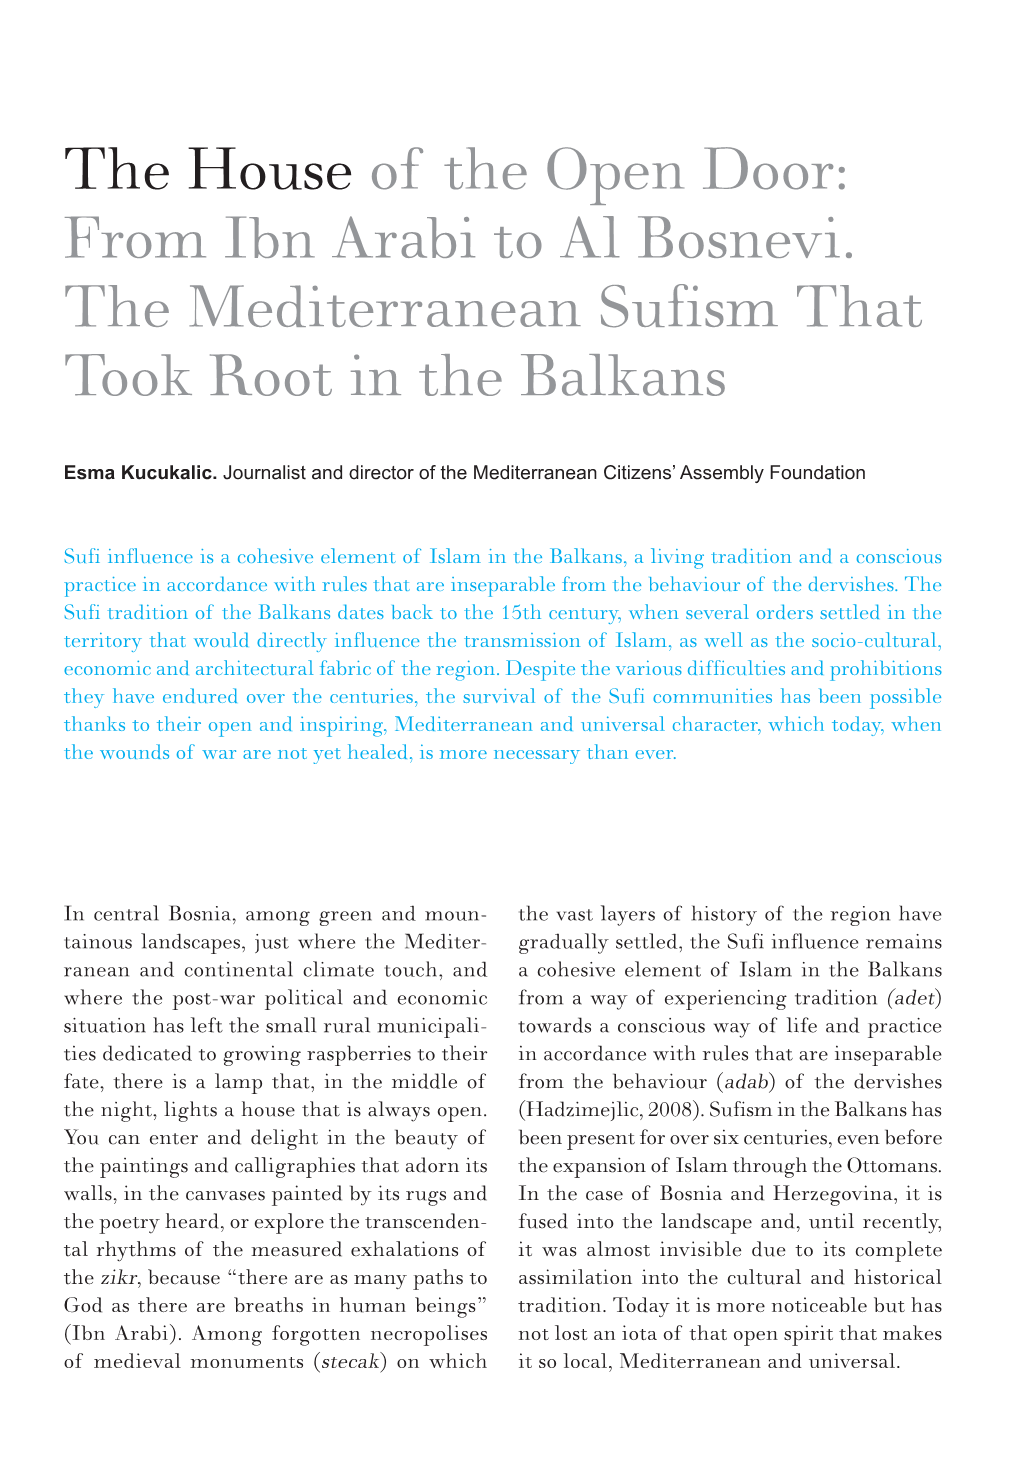 From Ibn Arabi to Al Bosnevi. the Mediterranean Sufism That Took Root in the Balkans